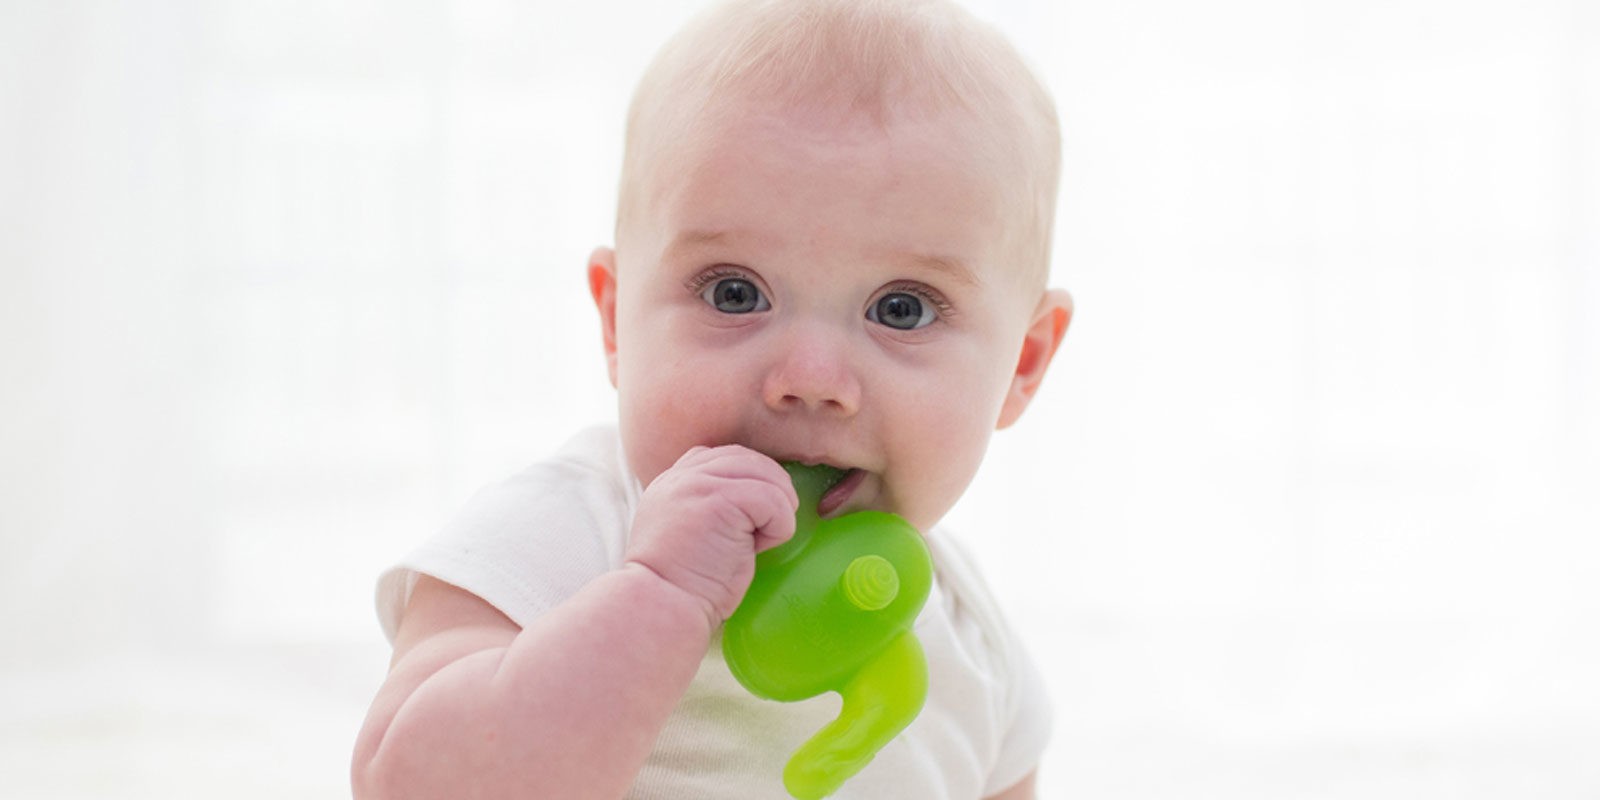 teether for 6 month baby